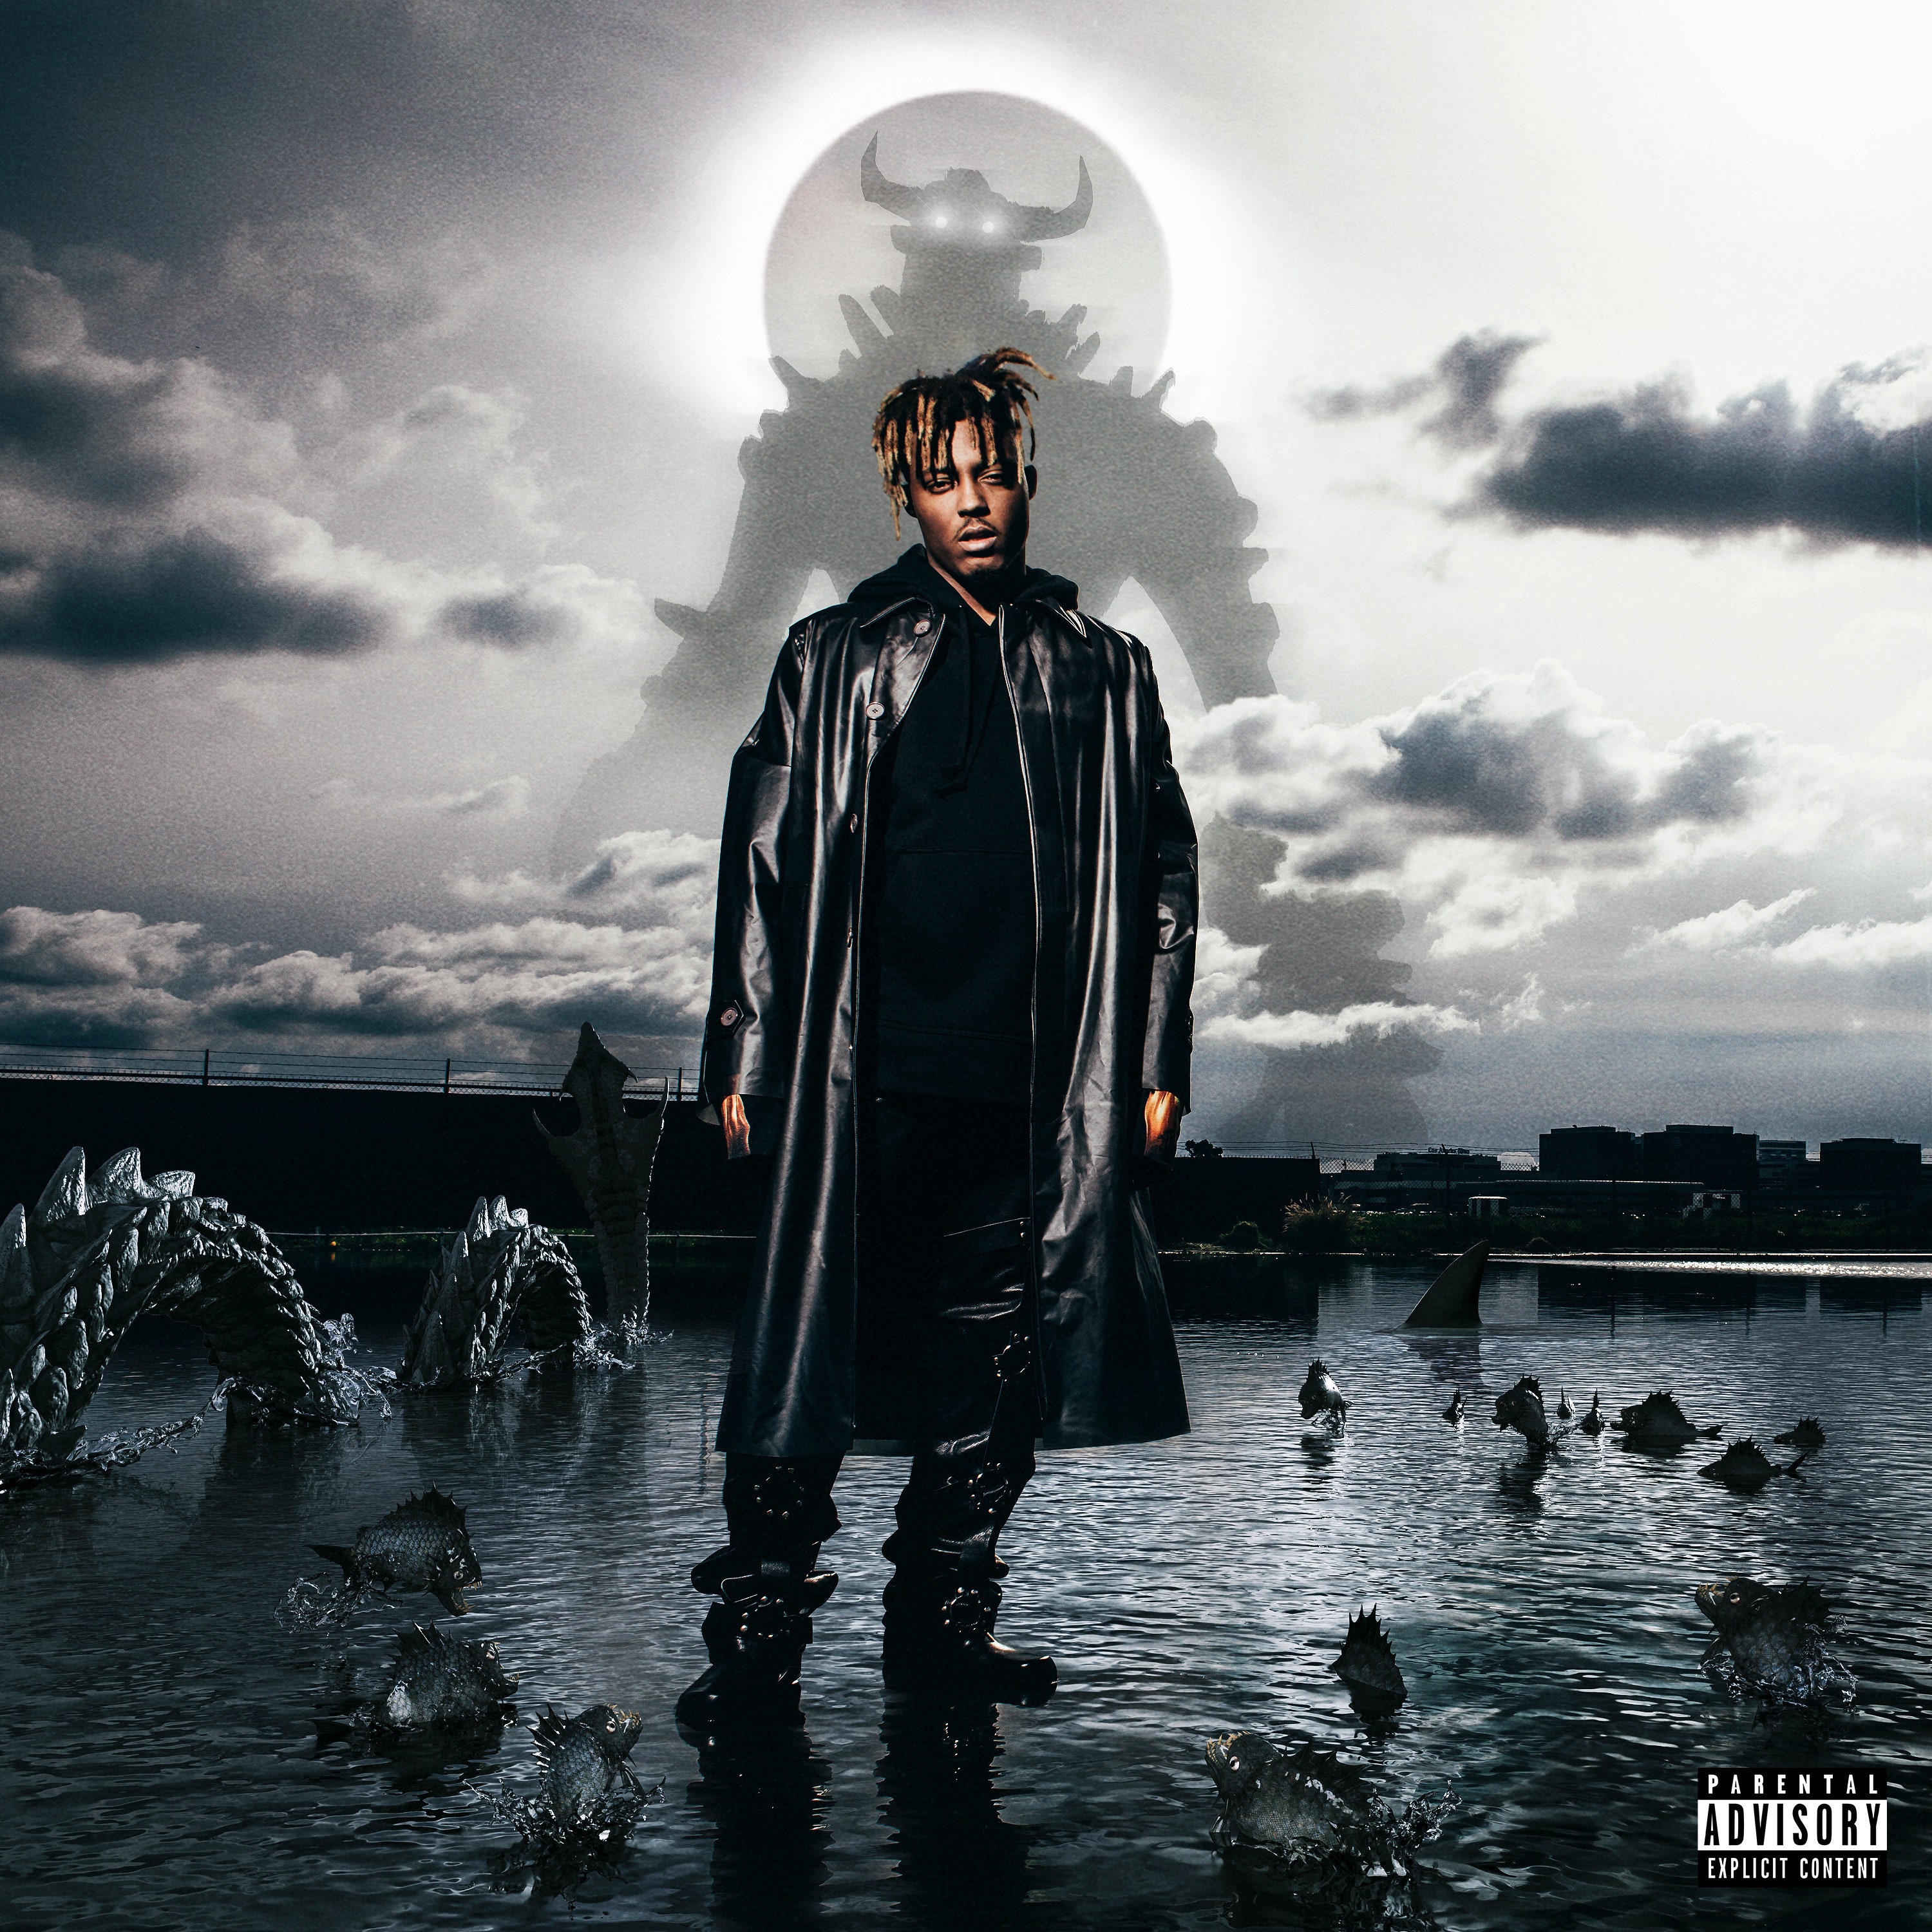 Avatar of a rapper with artistic backdrop featuring a full moon and water with flying birds, representing Juice Wrld in a dramatic setting.